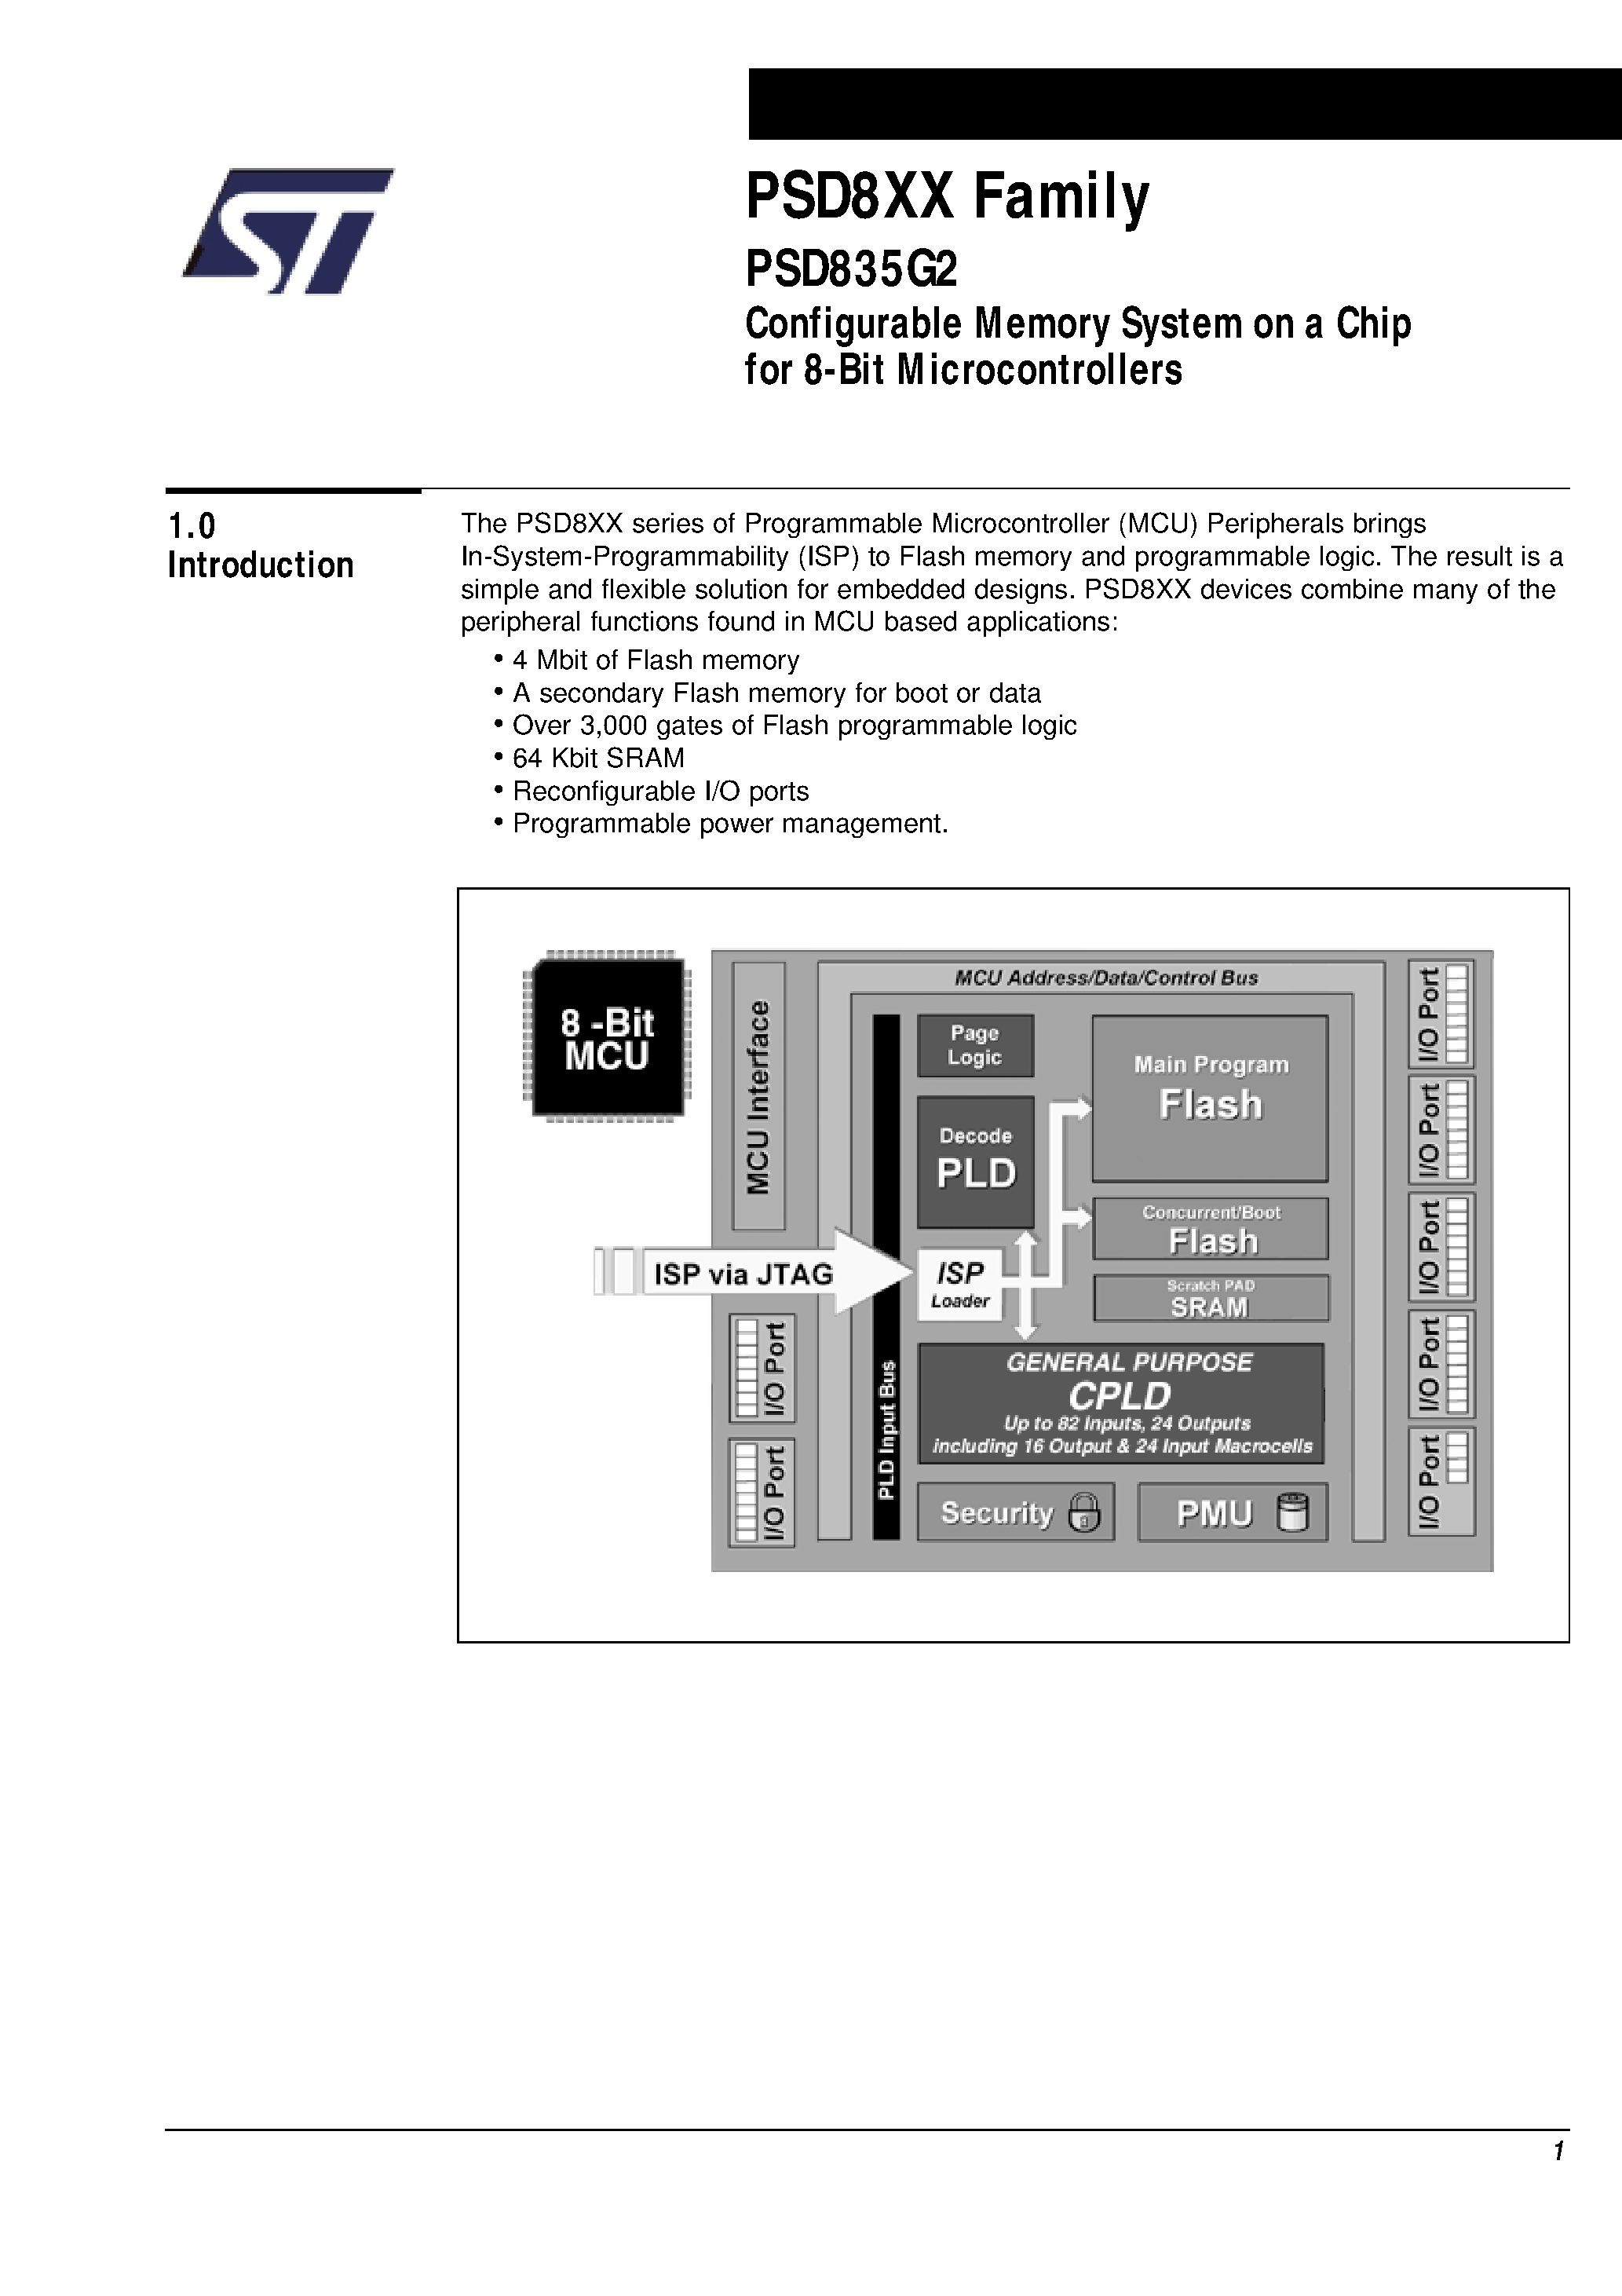 Datasheet PSD835F2-A-70M - Configurable Memory System on a Chip for 8-Bit Microcontrollers page 2